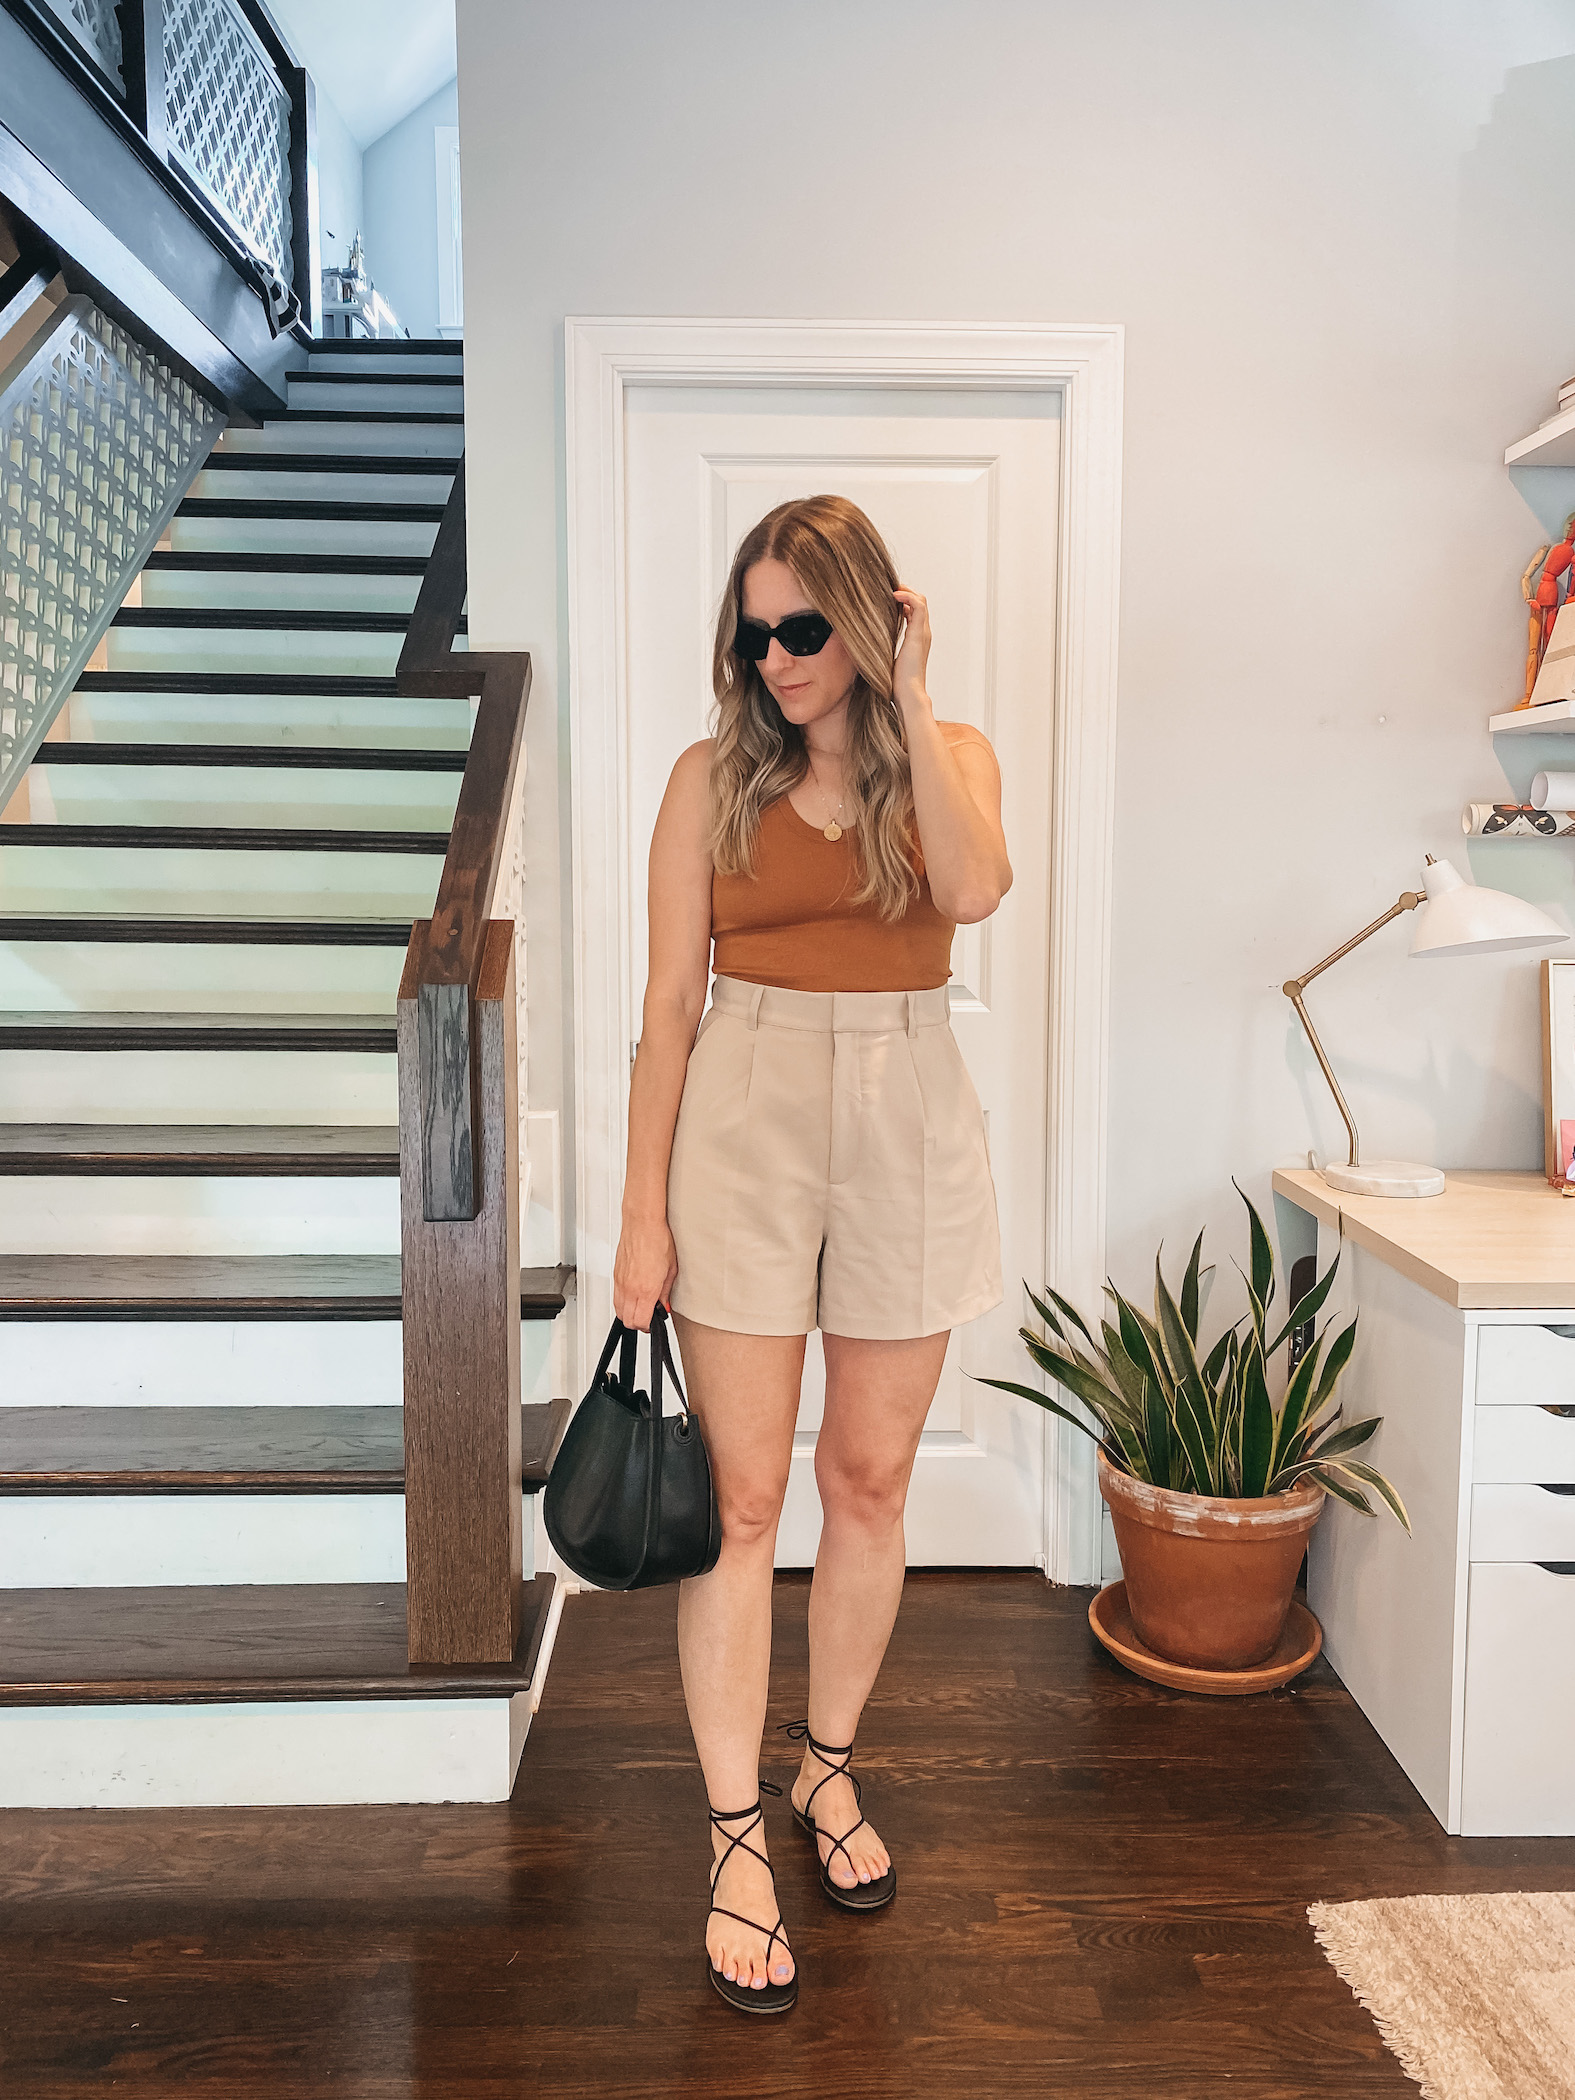 Green Shorts: 5 Outfits - Michelle Tomczak